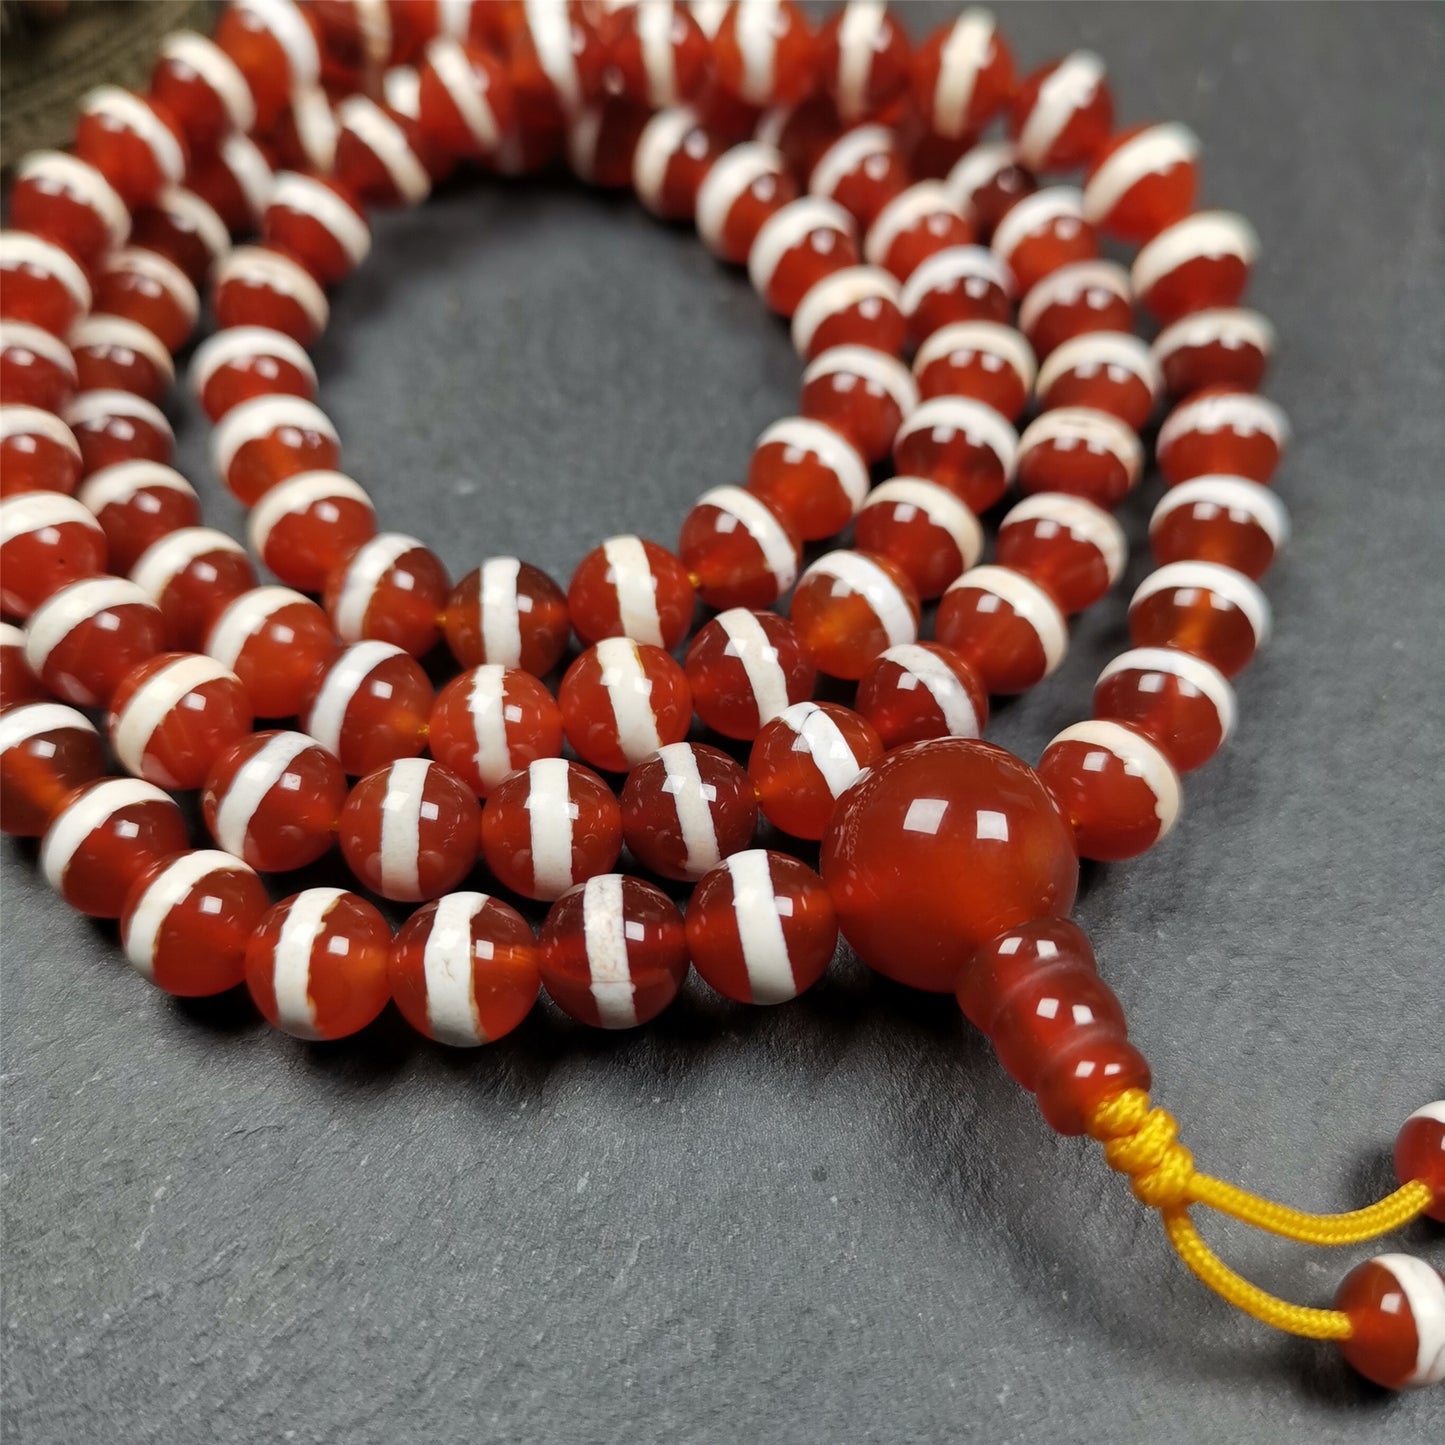 This Red Agate Medicine Buddha Bhaisajyaguru Beads Mala was handmade from tibetan crafts man in Gerze County. It's composed of 108 pcs 8.5mm red agate beads,the pattern represents Medicine Buddha Bhaisajyaguru.